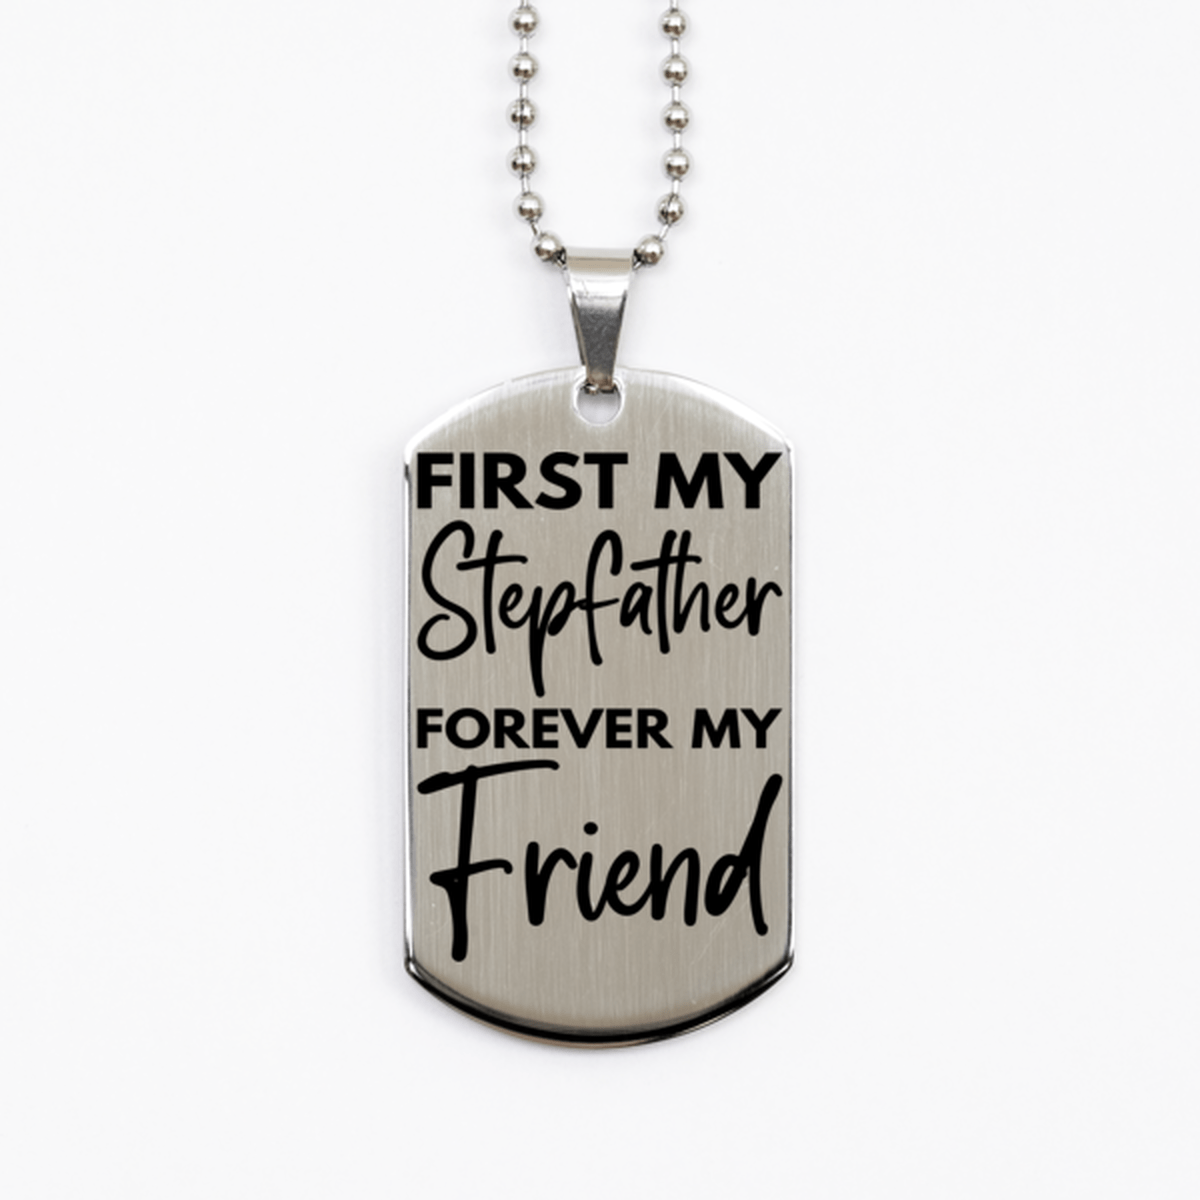 Inspirational Stepfather Silver Dog Tag Necklace, First My Stepfather Forever My Friend, Best Birthday Gifts for Stepfather